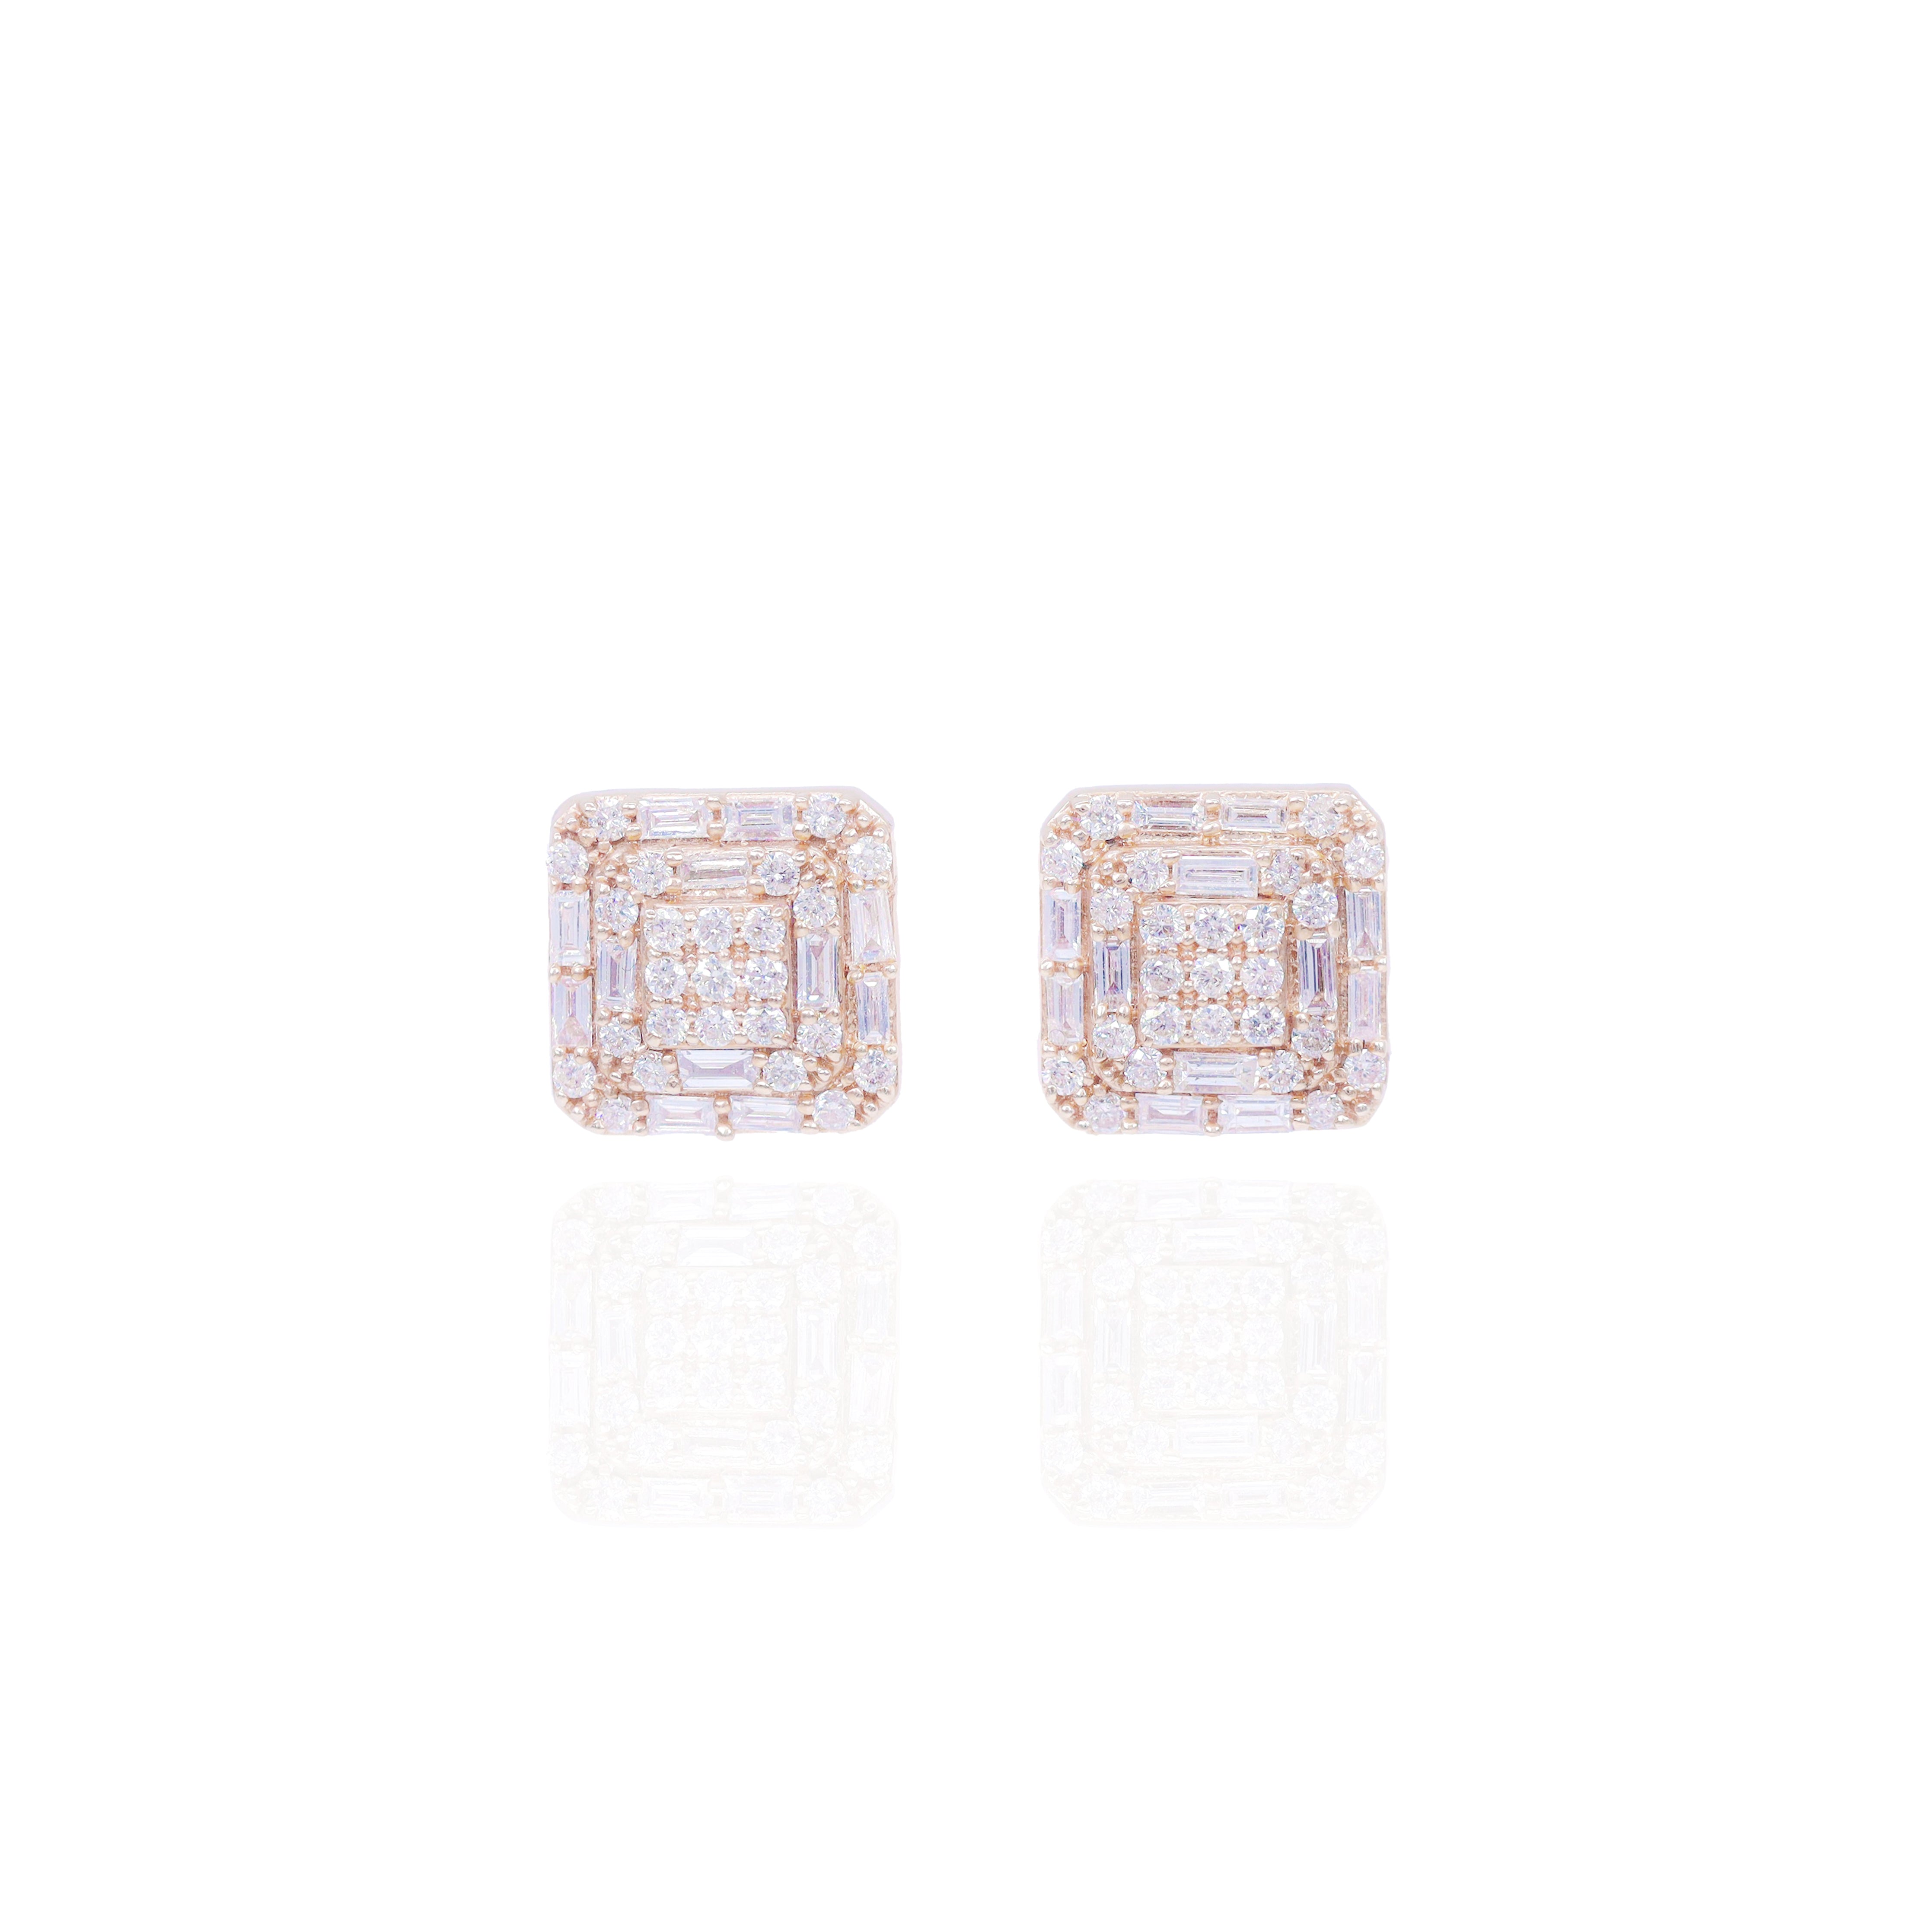 Square Shaped Round & Baguette Diamond Earrings